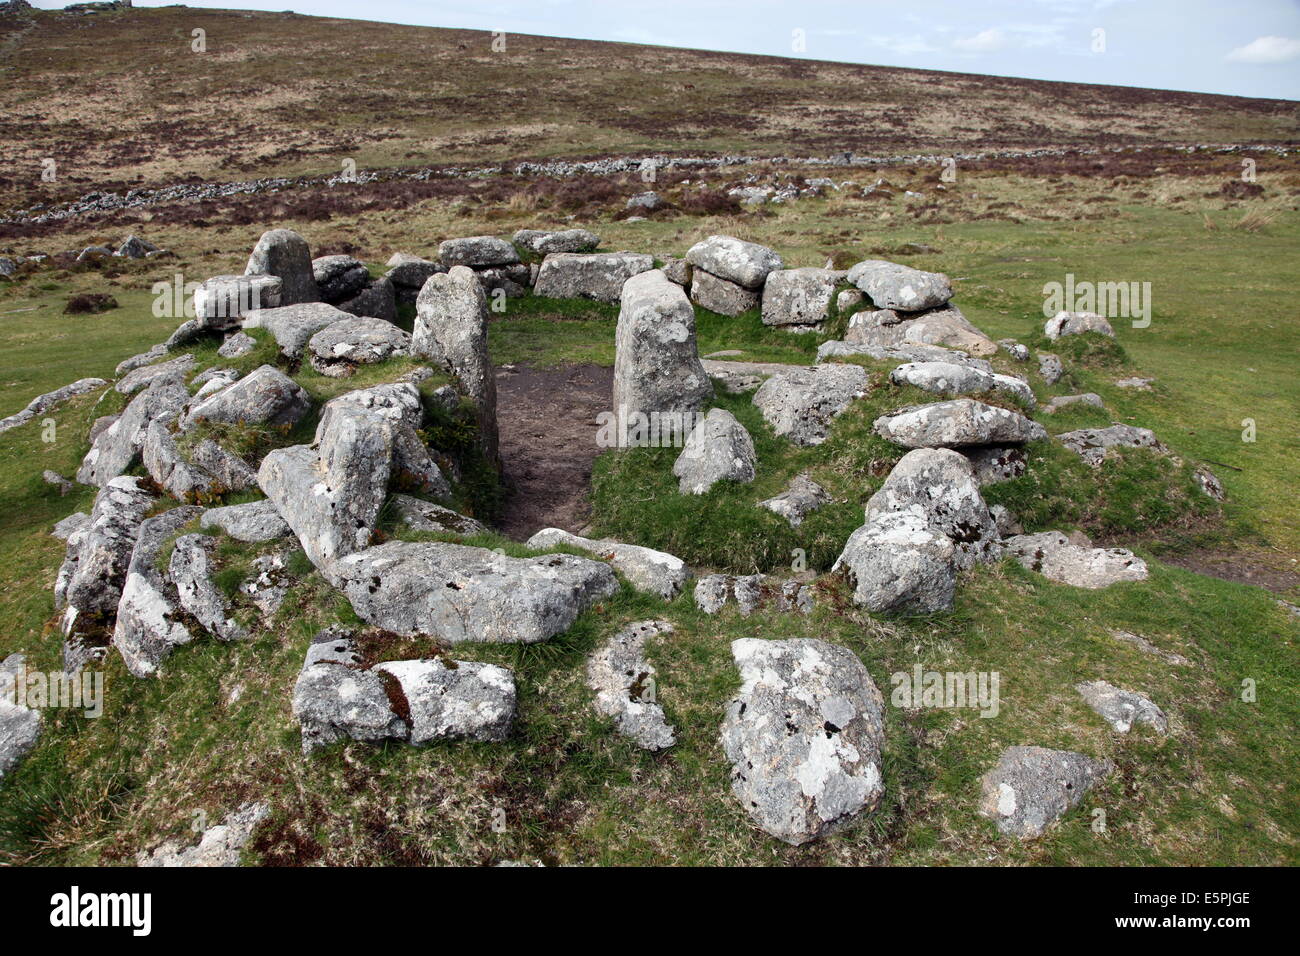 Ruins of early Bronze Age house, about 3500 years old, Grimspound, Dartmoor National Park, Devon, England, United Kingdom Stock Photo